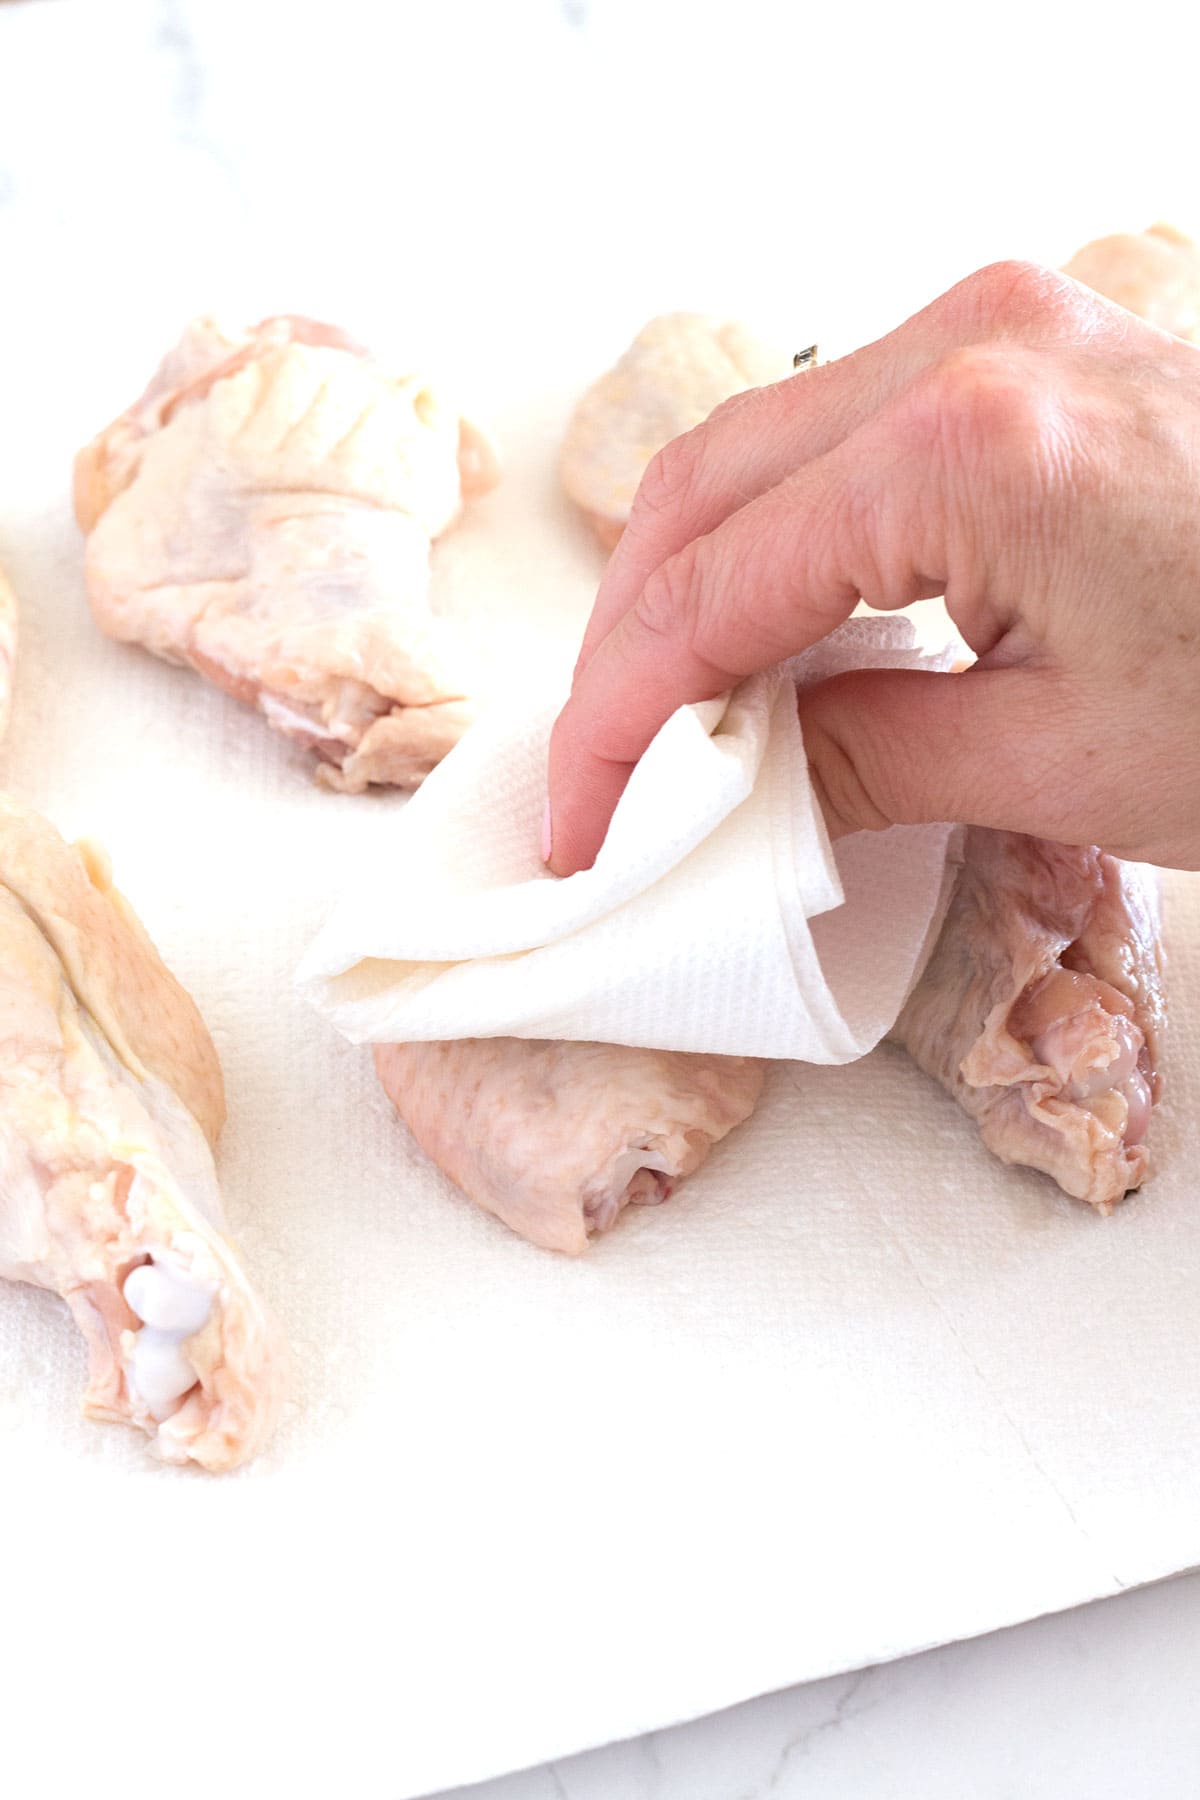 Using paper towels to dry the wings before baking.